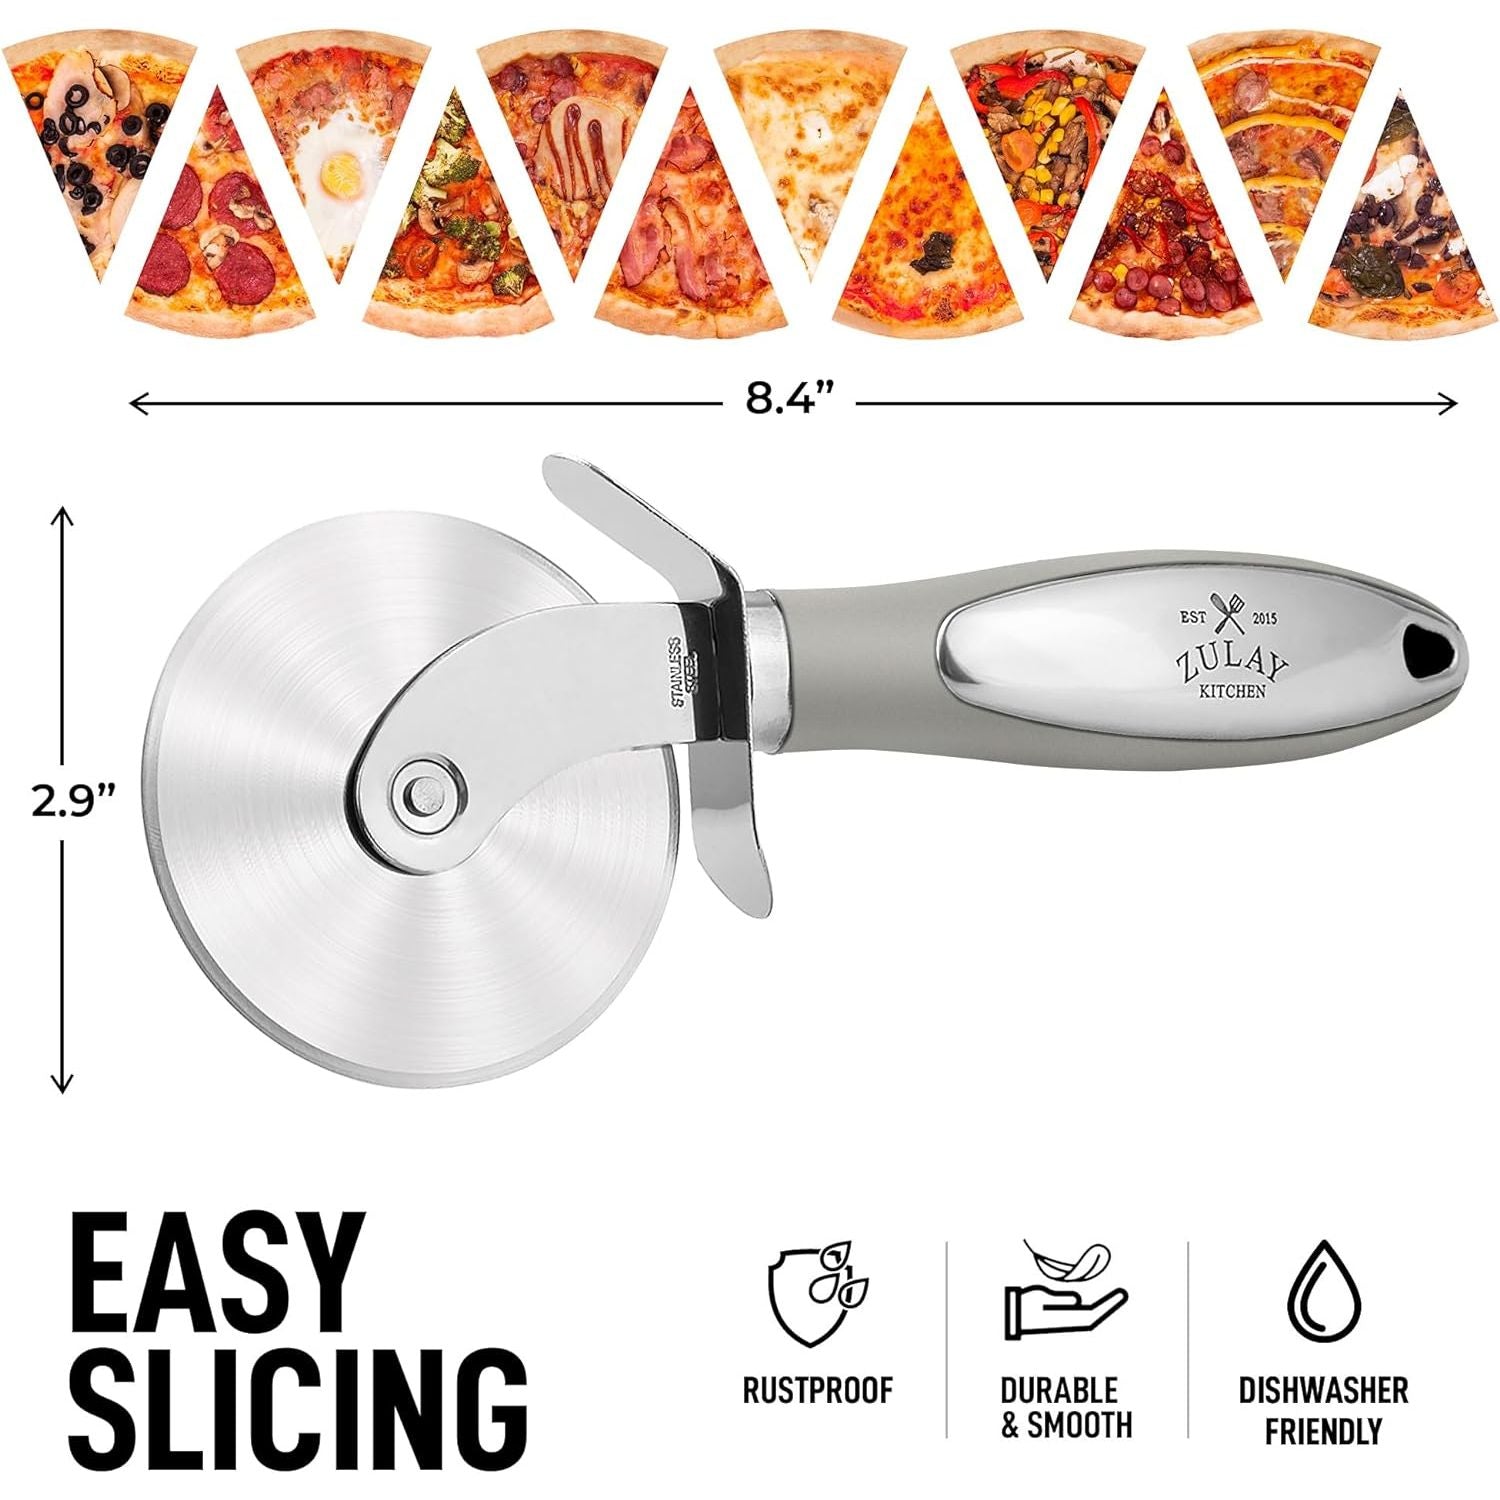 Zulay Kitchen Pizza Cutter Wheel Curved Handle - Black